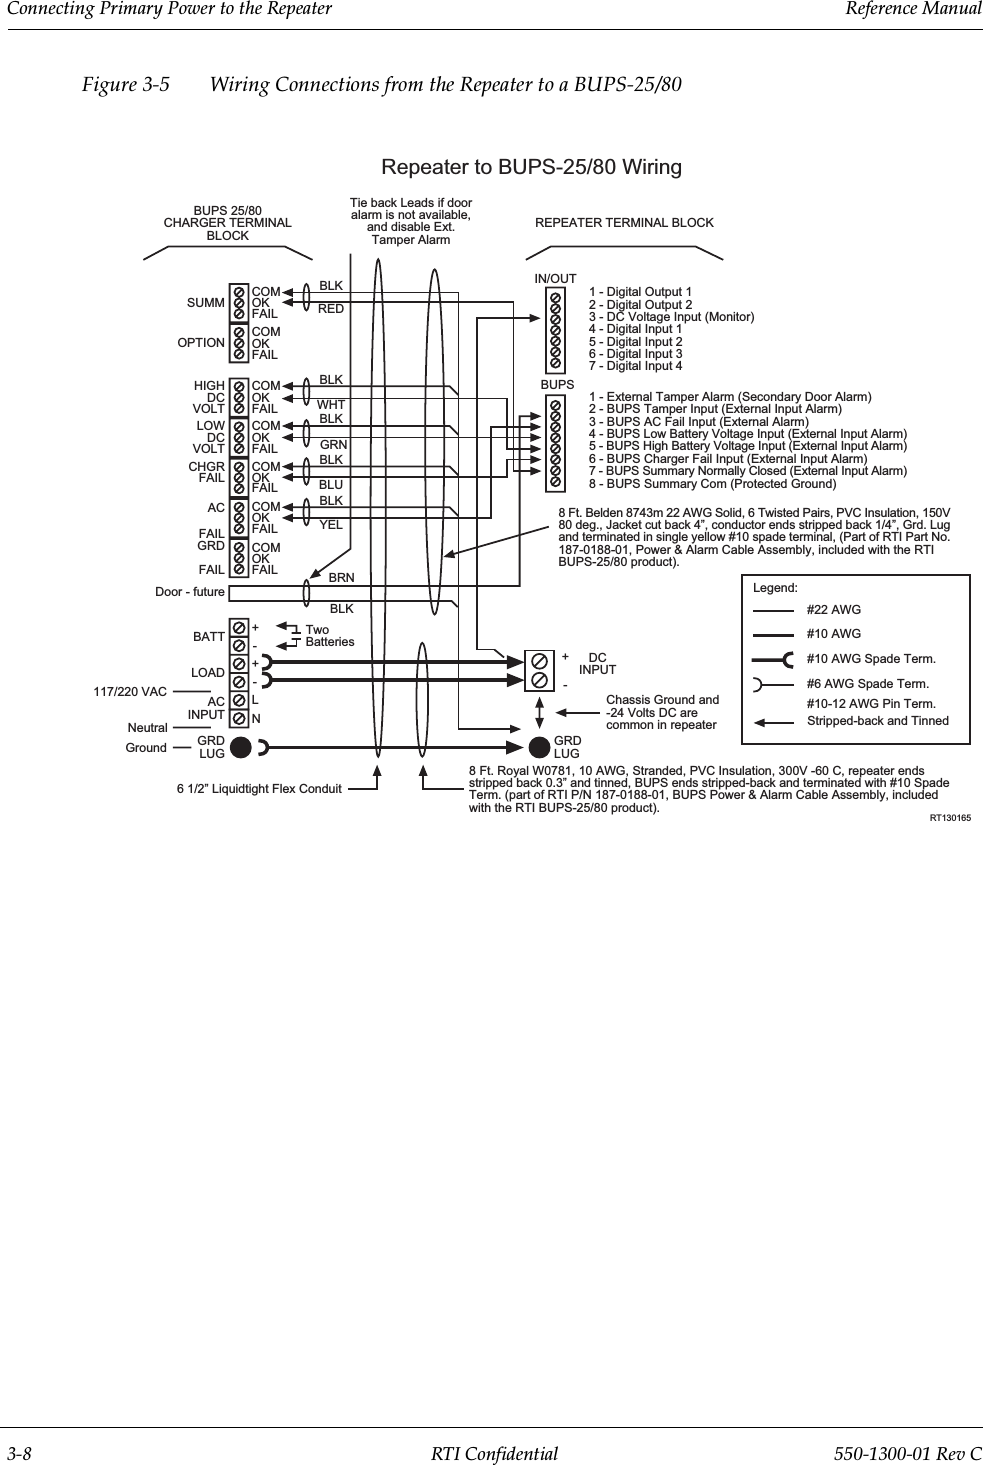 Connecting Primary Power to the Repeater                 Reference Manual3-8 RTI Confidential 550-1300-01 Rev CFigure 3-5 Wiring Connections from the Repeater to a BUPS-25/80REPEATER TERMINAL BLOCKIN/OUTTie back Leads if dooralarm is not available,and disable Ext.Tamper AlarmBUPS 25/80CHARGER TERMINALBLOCKBLKREDCOMOKOKCOMFAILFAILFAILFAILCOMCOMCOMOKOKOKBLKBLKBLKSUMMOPTIONHIGHDCVOLTLOWDCVOLTFAILCHGRACGRNWHTBLKBLUYELBRNBLKFAILFAILFAILCOMOKCOMOKFAILFAILGRDDoor - futureBATTLOADTwoBatteries++--LNACINPUTGRDLUG117/220 VACNeutralGround6 1/2 Liquidtight Flex Conduit1 - Digital Output 12 - Digital Output 23 - DC Voltage Input (Monitor)4 - Digital Input 15 - Digital Input 26 - Digital Input 37 - Digital Input 41 - External Tamper Alarm (Secondary Door Alarm)2 - BUPS Tamper Input (External Input Alarm)3 - BUPS AC Fail Input (External Alarm)4 - BUPS Low Battery Voltage Input (External Input Alarm)5 - BUPS High Battery Voltage Input (External Input Alarm)6 - BUPS Charger Fail Input (External Input Alarm)7 - BUPS Summary Normally Closed (External Input Alarm)8 - BUPS Summary Com (Protected Ground)8 Ft. Belden 8743m 22 AWG Solid, 6 Twisted Pairs, PVC Insulation, 150V80 deg., Jacket cut back 4, conductor ends stripped back 1/4, Grd. Lugand terminated in single yellow #10 spade terminal, (Part of RTI Part No.187-0188-01, Power &amp; Alarm Cable Assembly, included with the RTIBUPS-25/80 product).Legend:#22 AWG#10 AWG#10 AWG Spade Term.#6 AWG Spade Term.#10-12 AWG Pin Term.Stripped-back and TinnedDCINPUT+-Chassis Ground and-24 Volts DC arecommon in repeater8 Ft. Royal W0781, 10 AWG, Stranded, PVC Insulation, 300V -60 C, repeater endsstripped back 0.3 and tinned, BUPS ends stripped-back and terminated with #10 SpadeTerm. (part of RTI P/N 187-0188-01, BUPS Power &amp; Alarm Cable Assembly, includedwith the RTI BUPS-25/80 product).RT130165Repeater to BUPS-25/80 WiringBUPSGRDLUG